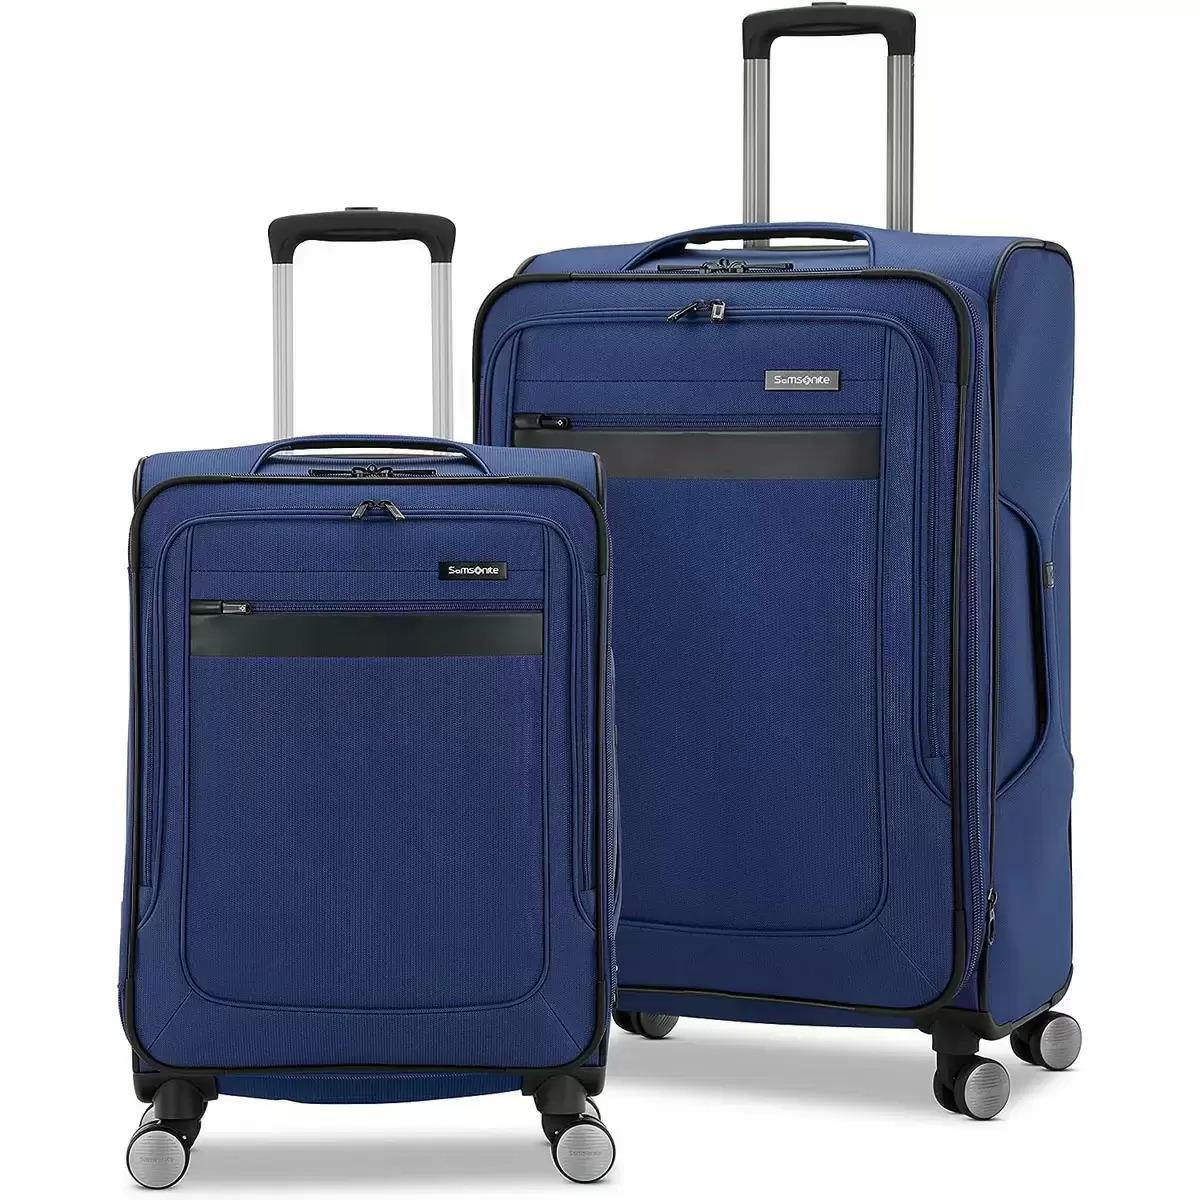 Samsonite Ascella 3.0 Softside Expandable Luggage with Spinners for $151.20 Shipped